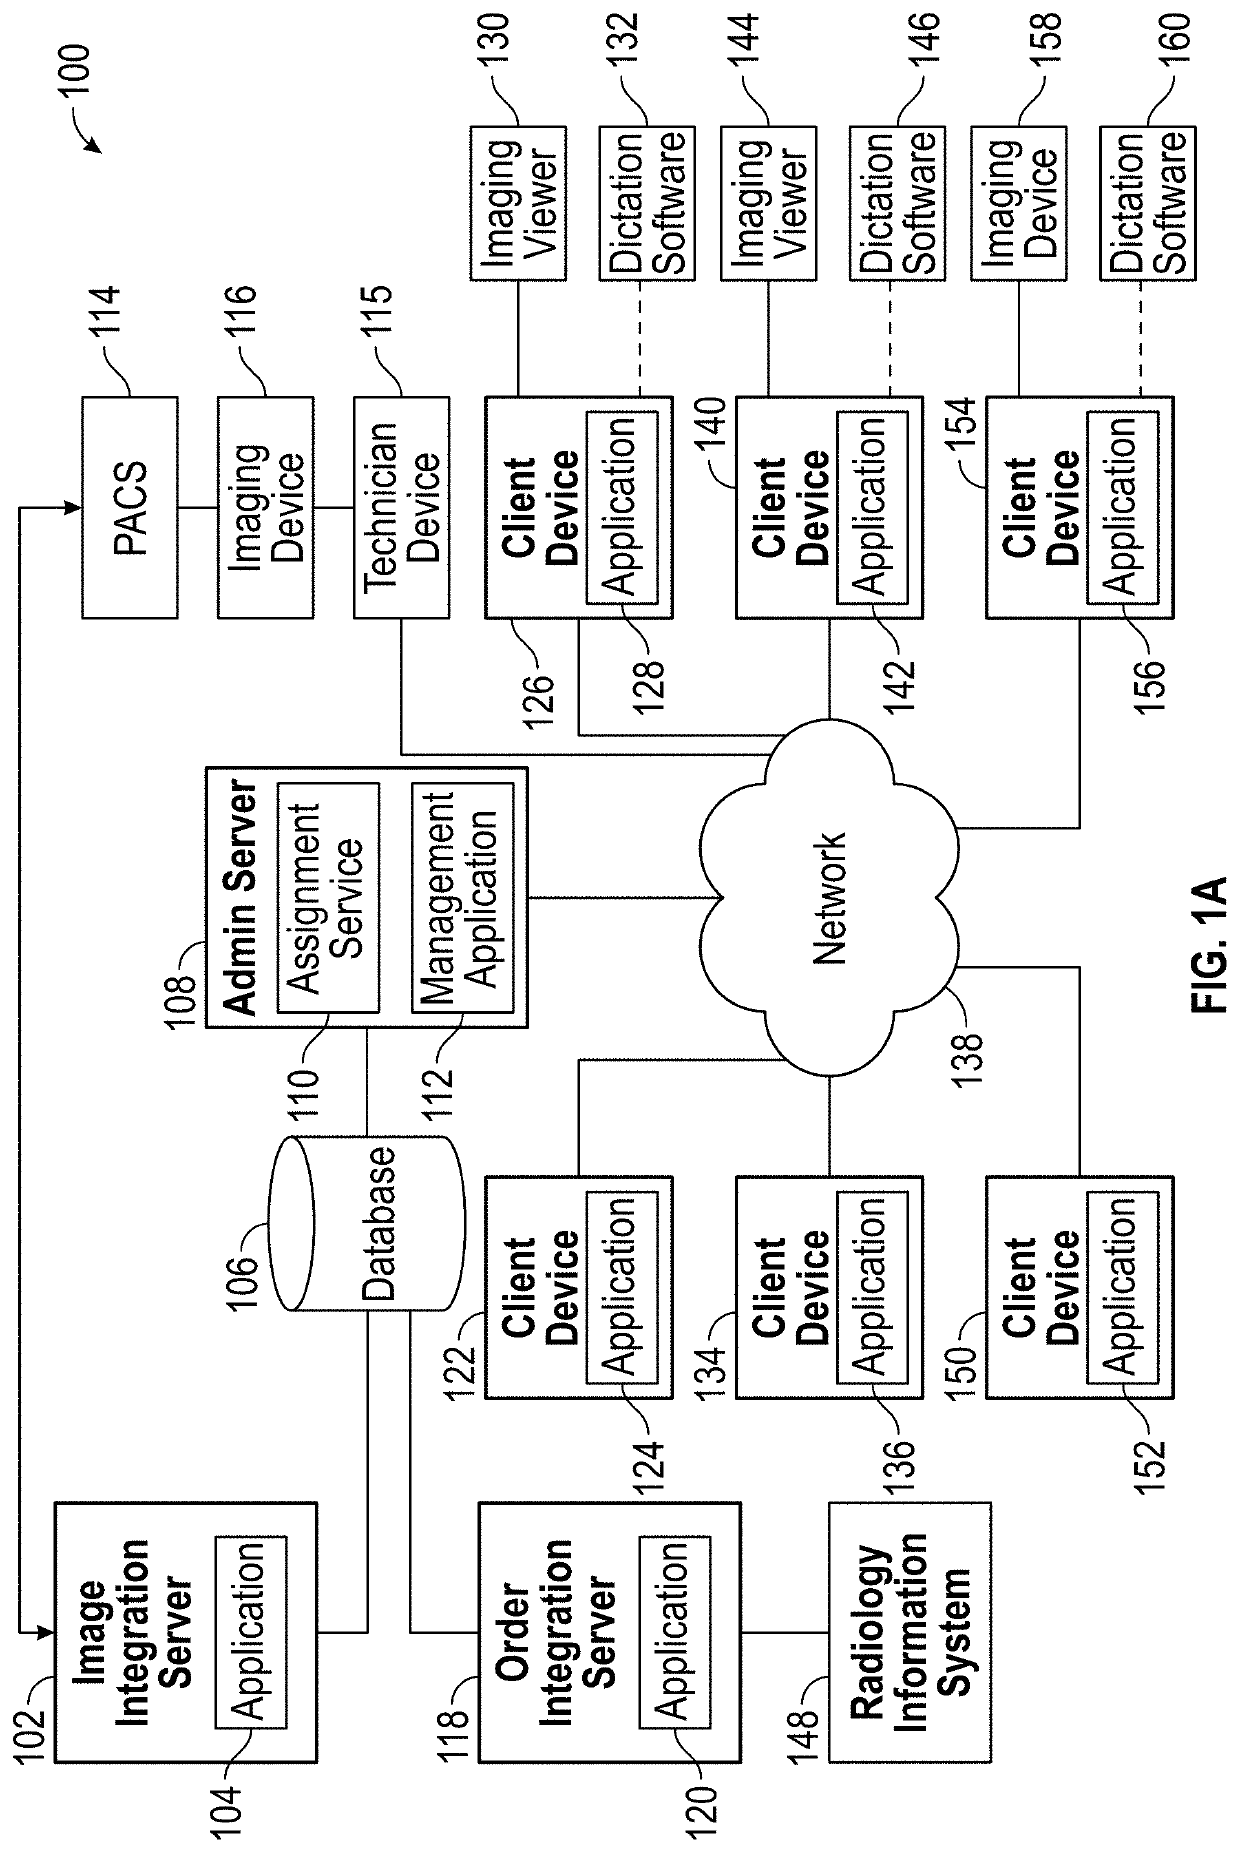 System and method for workflow management and image review